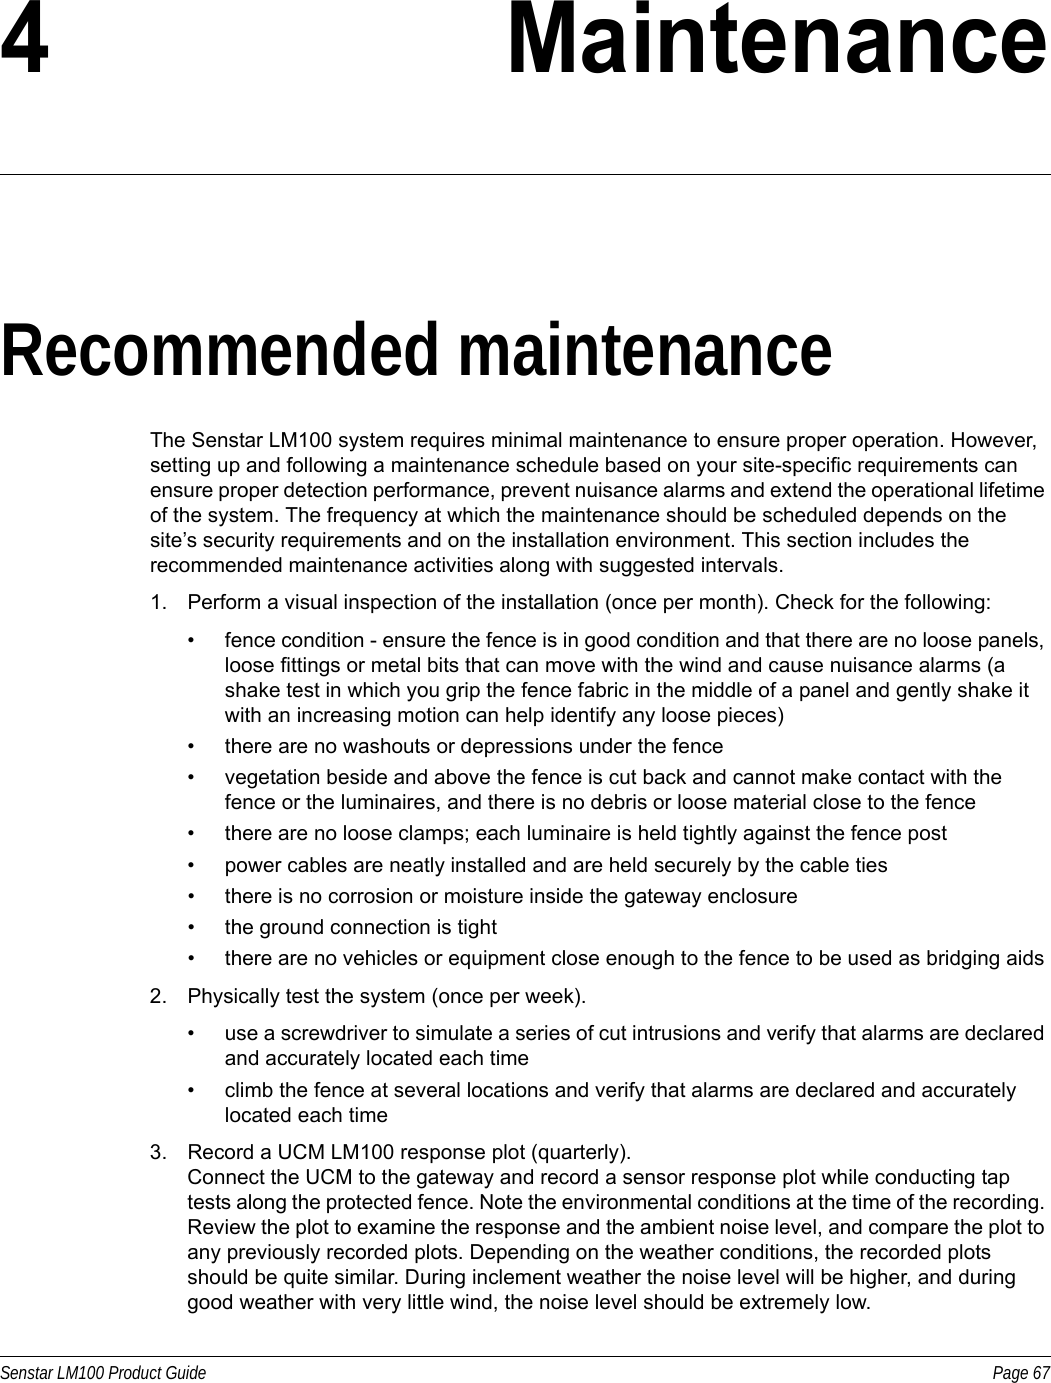 Senstar LM100 Product Guide Page 674 MaintenanceRecommended maintenanceThe Senstar LM100 system requires minimal maintenance to ensure proper operation. However, setting up and following a maintenance schedule based on your site-specific requirements can ensure proper detection performance, prevent nuisance alarms and extend the operational lifetime of the system. The frequency at which the maintenance should be scheduled depends on the site’s security requirements and on the installation environment. This section includes the recommended maintenance activities along with suggested intervals.1. Perform a visual inspection of the installation (once per month). Check for the following: • fence condition - ensure the fence is in good condition and that there are no loose panels, loose fittings or metal bits that can move with the wind and cause nuisance alarms (a shake test in which you grip the fence fabric in the middle of a panel and gently shake it with an increasing motion can help identify any loose pieces) • there are no washouts or depressions under the fence• vegetation beside and above the fence is cut back and cannot make contact with the fence or the luminaires, and there is no debris or loose material close to the fence• there are no loose clamps; each luminaire is held tightly against the fence post• power cables are neatly installed and are held securely by the cable ties• there is no corrosion or moisture inside the gateway enclosure• the ground connection is tight• there are no vehicles or equipment close enough to the fence to be used as bridging aids2. Physically test the system (once per week).• use a screwdriver to simulate a series of cut intrusions and verify that alarms are declared and accurately located each time• climb the fence at several locations and verify that alarms are declared and accurately located each time3. Record a UCM LM100 response plot (quarterly).Connect the UCM to the gateway and record a sensor response plot while conducting tap tests along the protected fence. Note the environmental conditions at the time of the recording. Review the plot to examine the response and the ambient noise level, and compare the plot to any previously recorded plots. Depending on the weather conditions, the recorded plots should be quite similar. During inclement weather the noise level will be higher, and during good weather with very little wind, the noise level should be extremely low. 